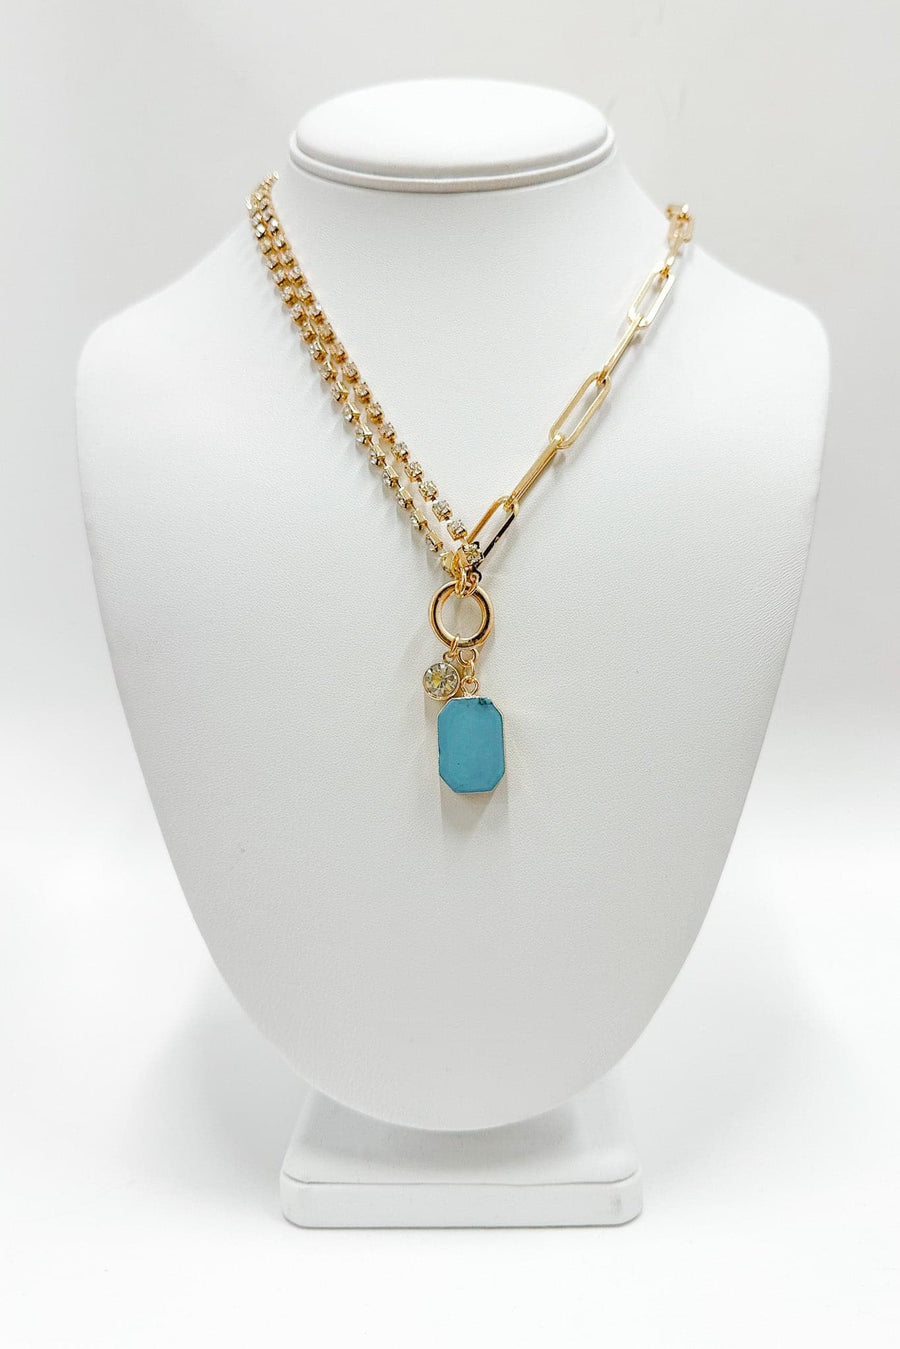 Gold Vibrant Moment Blue Chain Necklace - BACK IN STOCK - Madison and Mallory